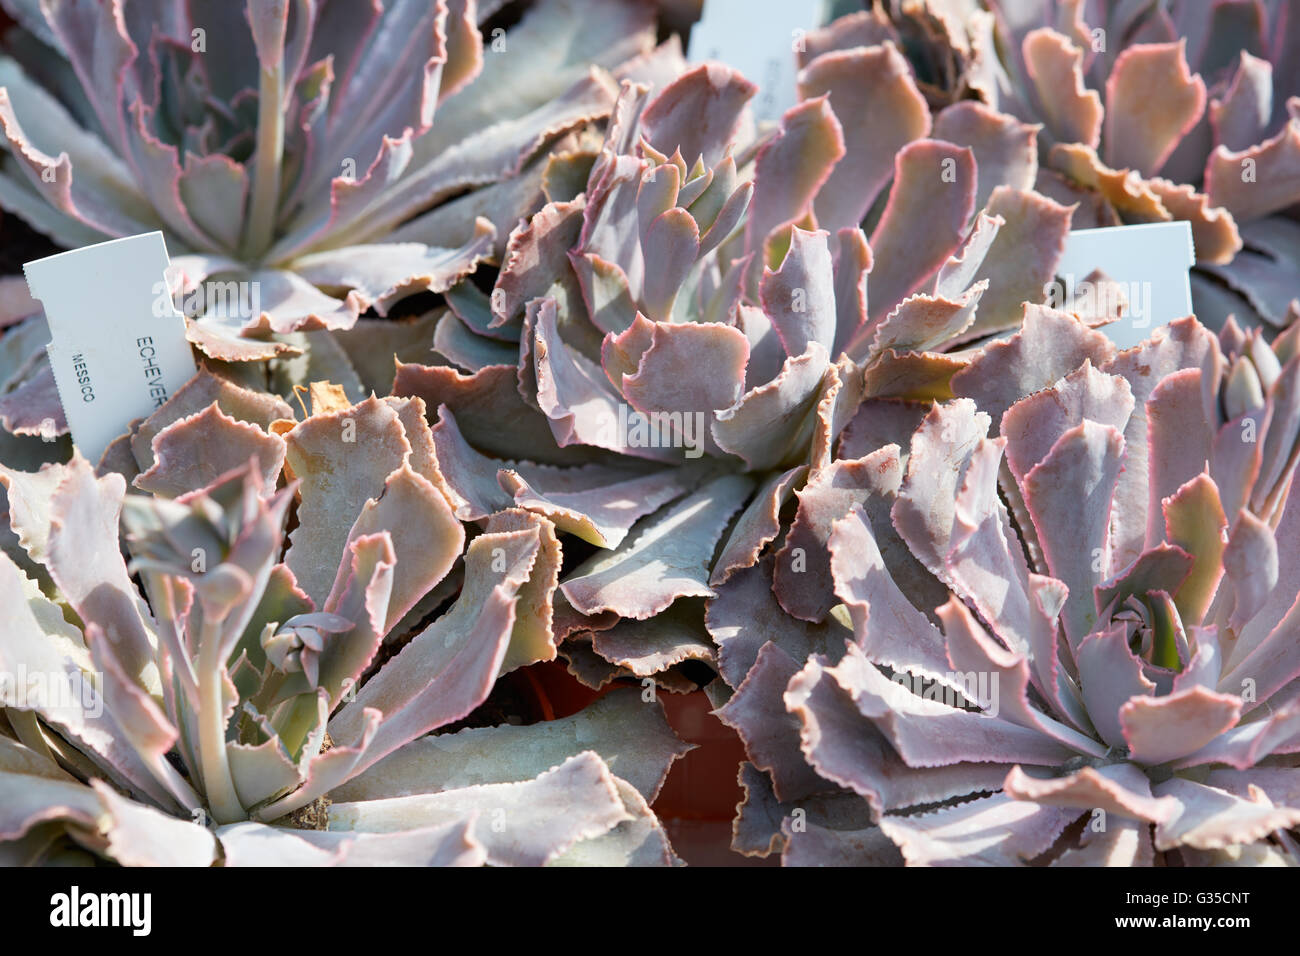 Echeveria, succulent plants with tag in a nursery Stock Photo